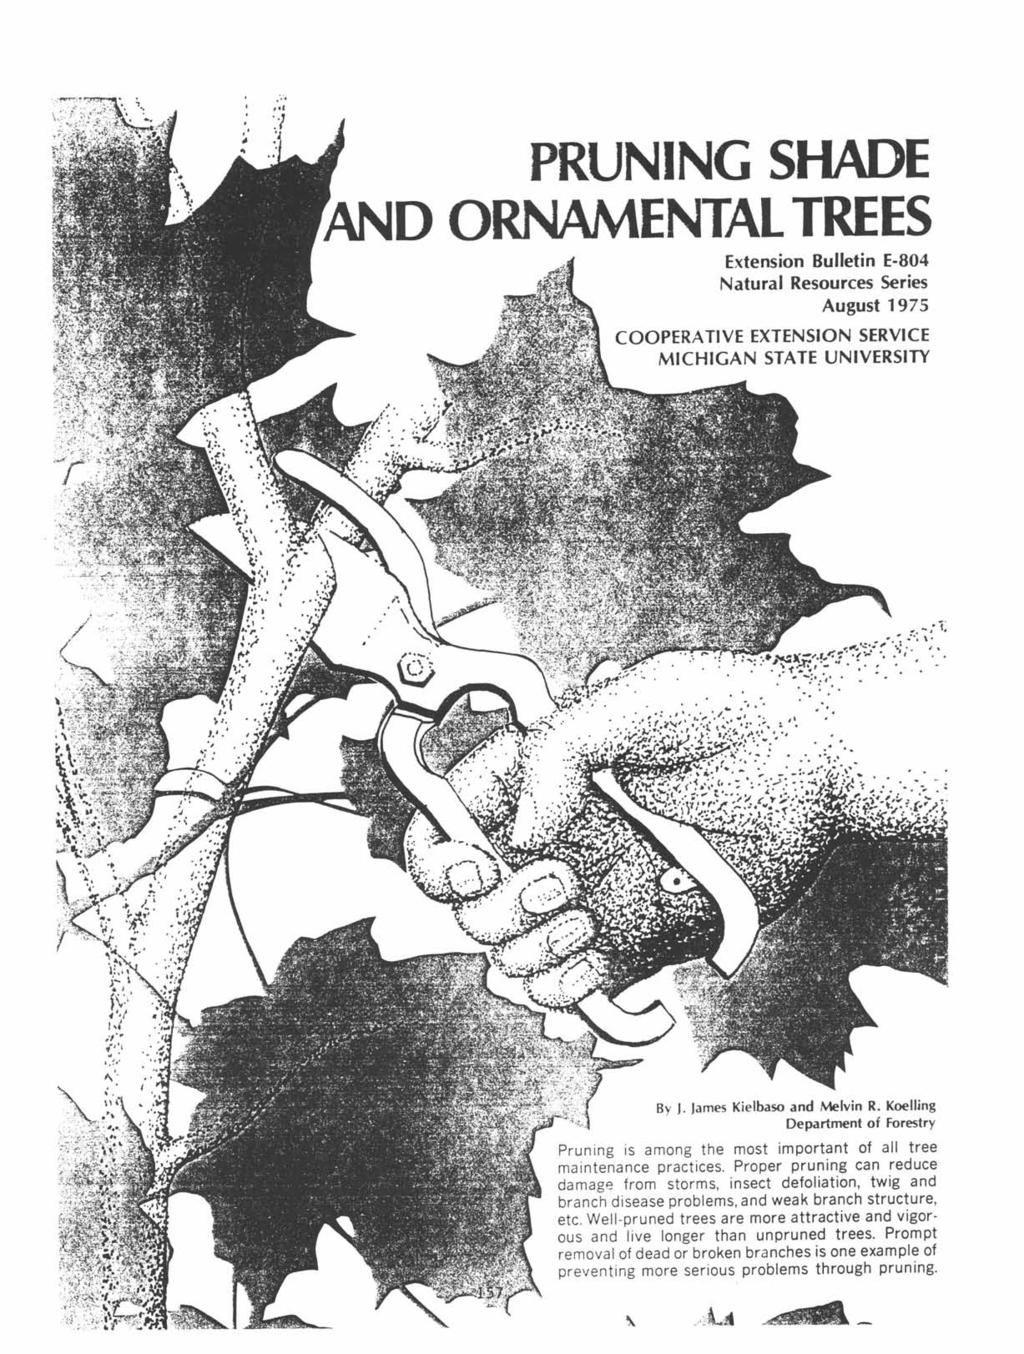 0 :.,.1 PRUNING SHADE AND ORNAMENTAL TREES Extension Bulletin E-804 Natural Resources Series August 1975 COOPERATIVE EXTENSION SERVICE MICHIGAN STATE UNIVERSITY.. o ::, By I.